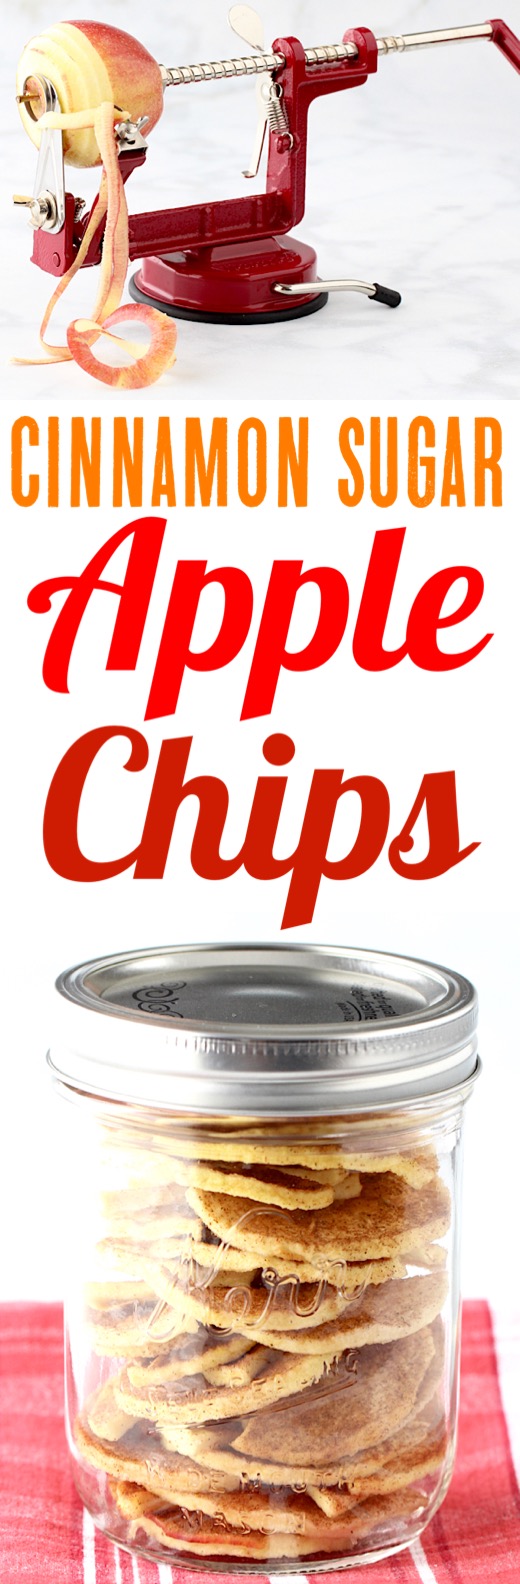 Apple Chips Recipe Easy Healthy Snack Made in your Dehydrator